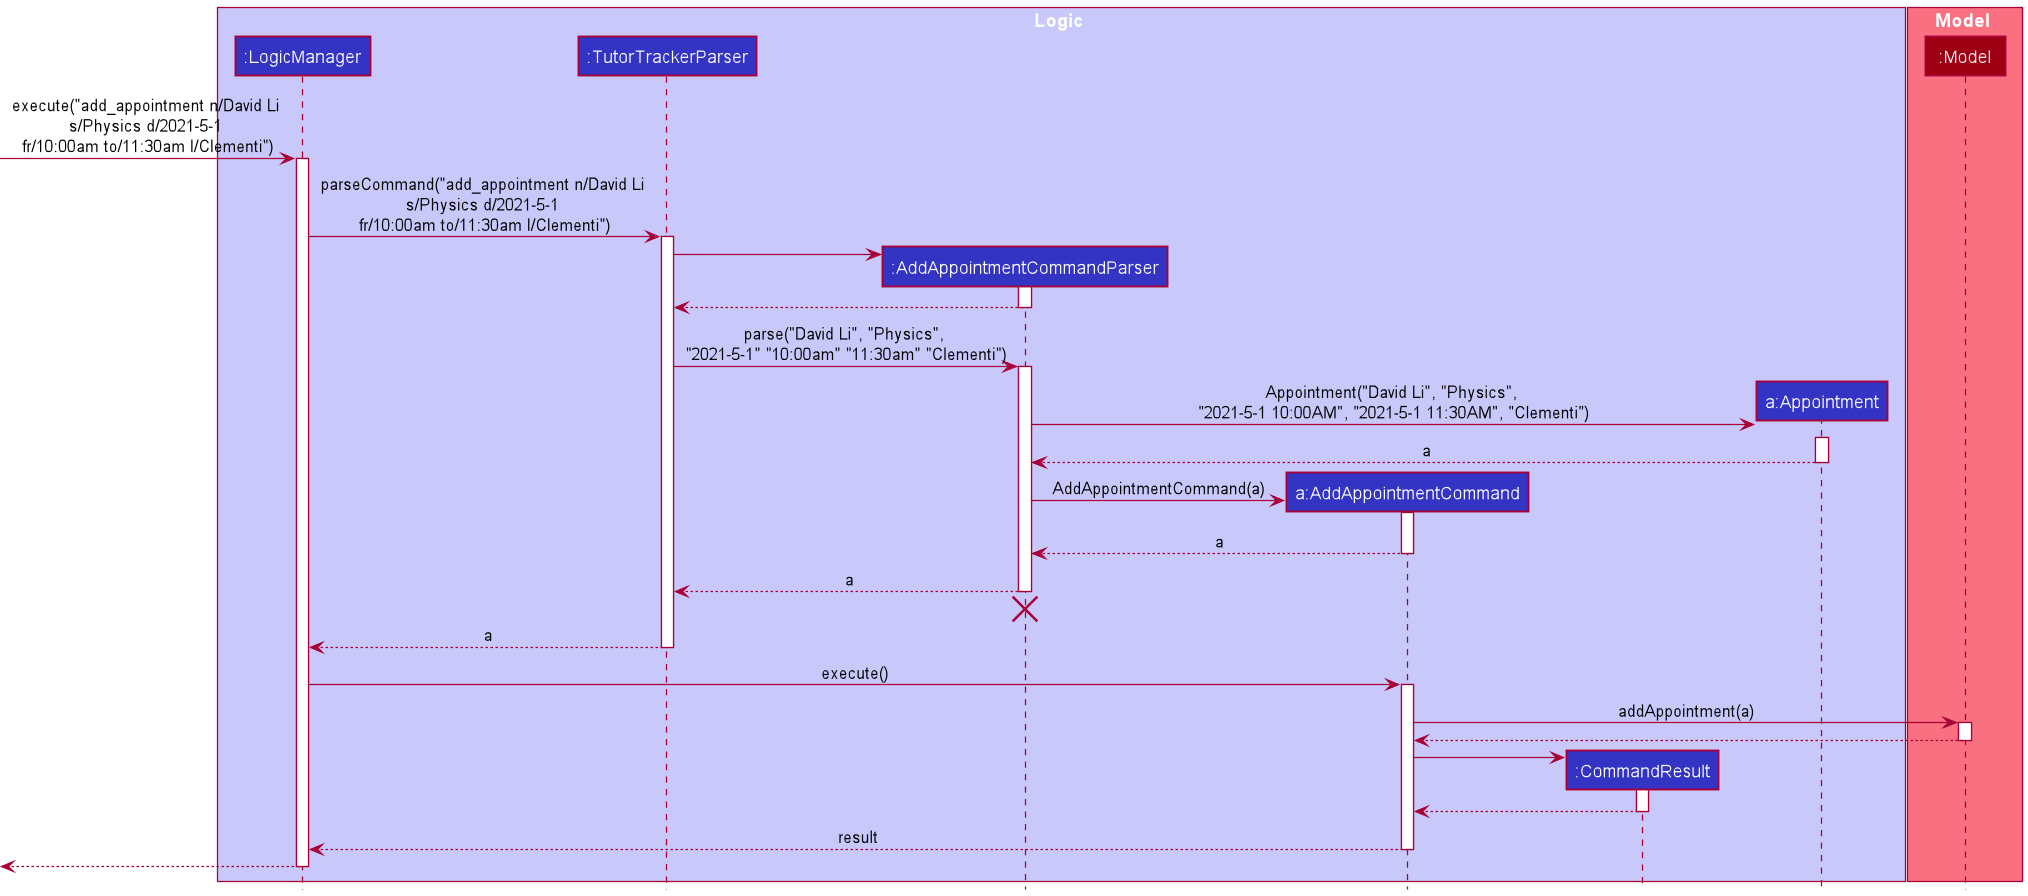 Sequence Diagram of Add Appointment